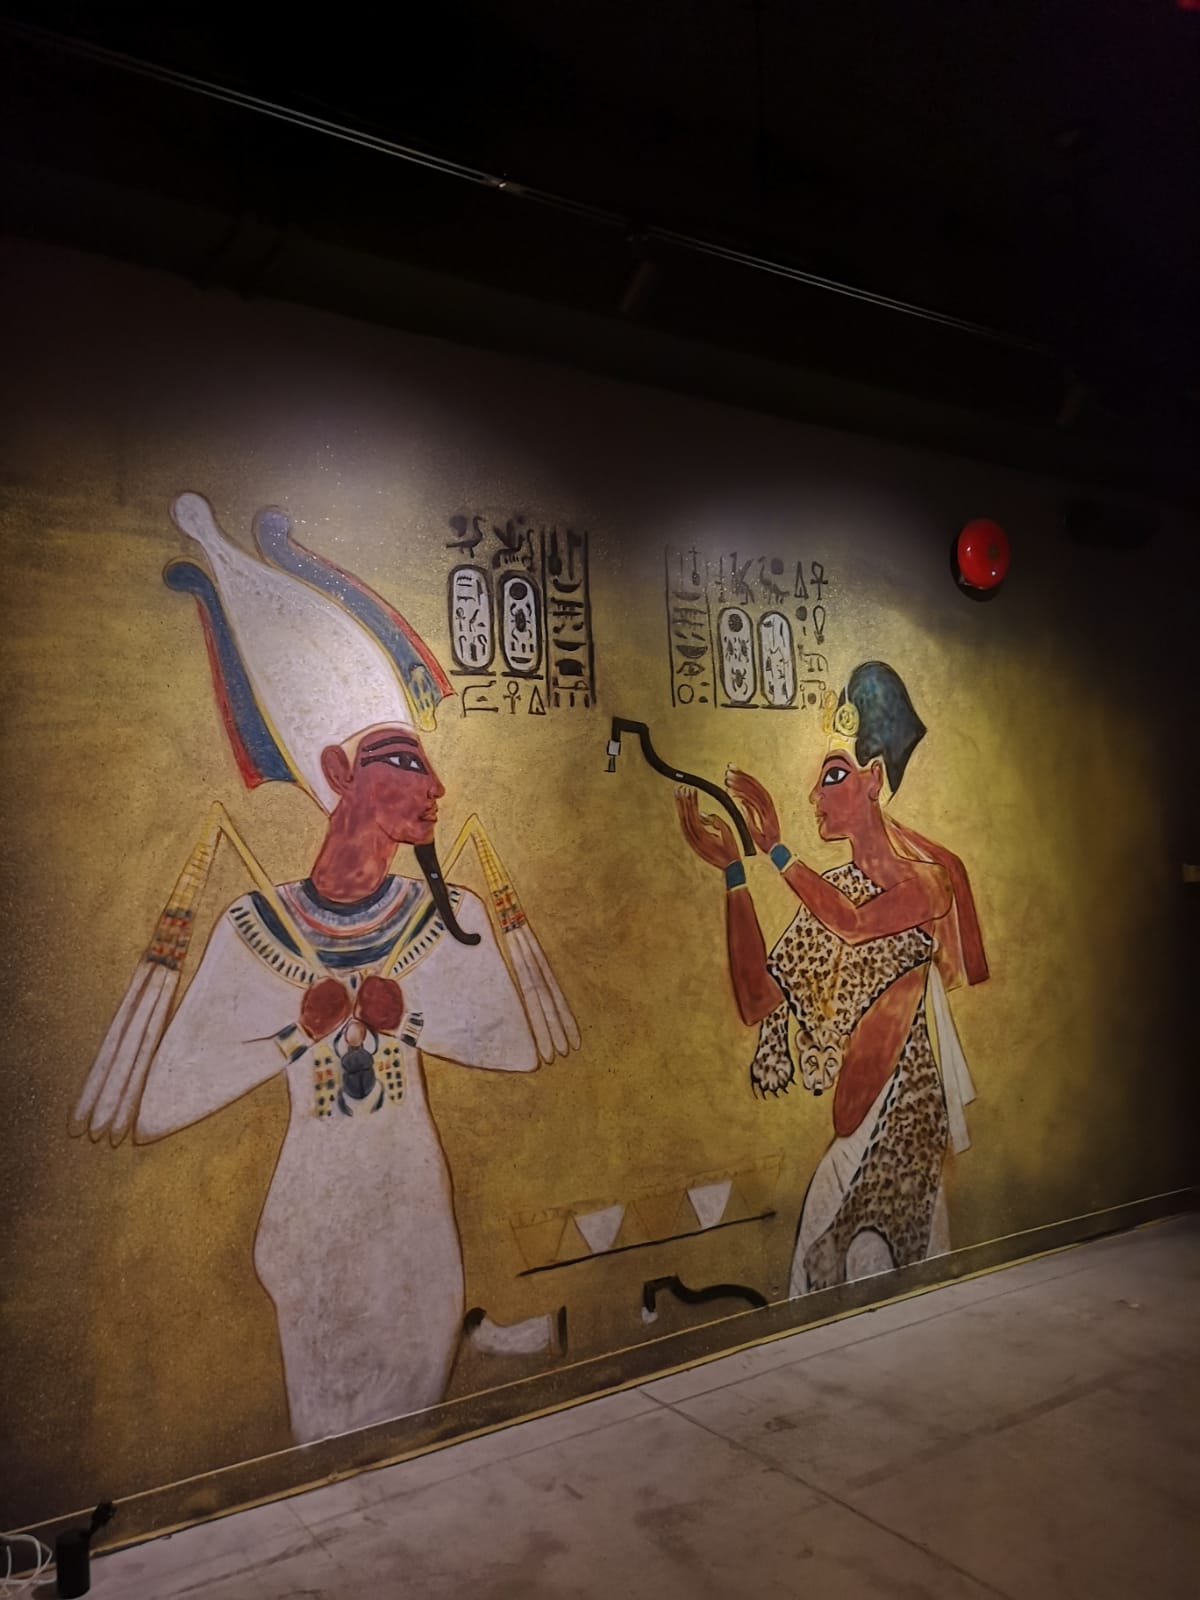 Recreation from Immersive Tut of one of the sections of the previous wall painting of the tomb of King Tutankhamun.